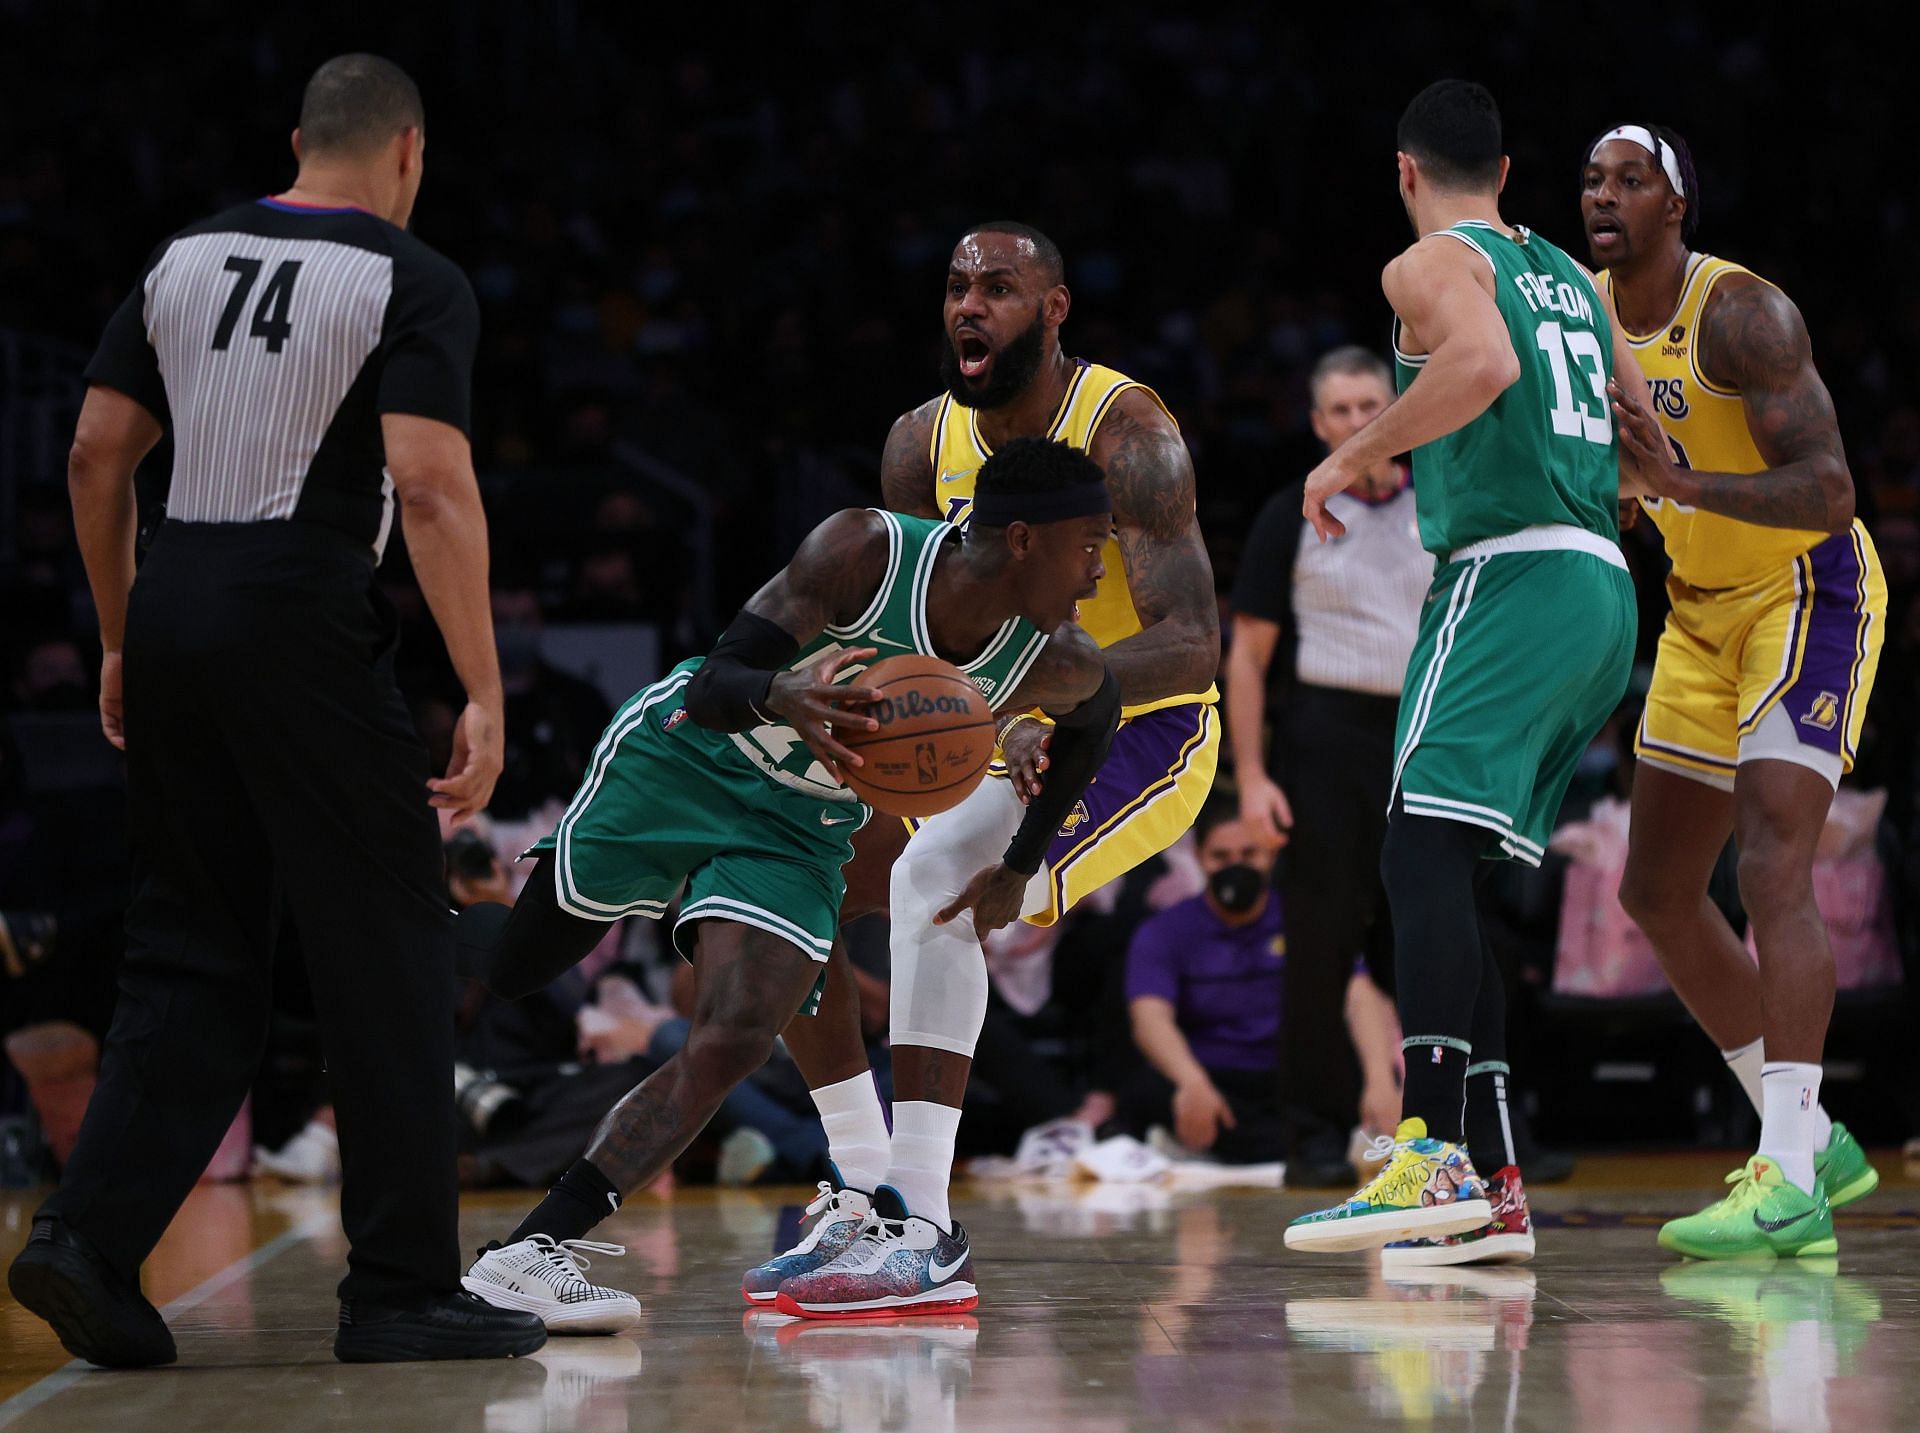 NBA Trade Rumors: LA Lakers tried offering second round picks and minimum contracts to Boston Celtics for Dennis Schroder